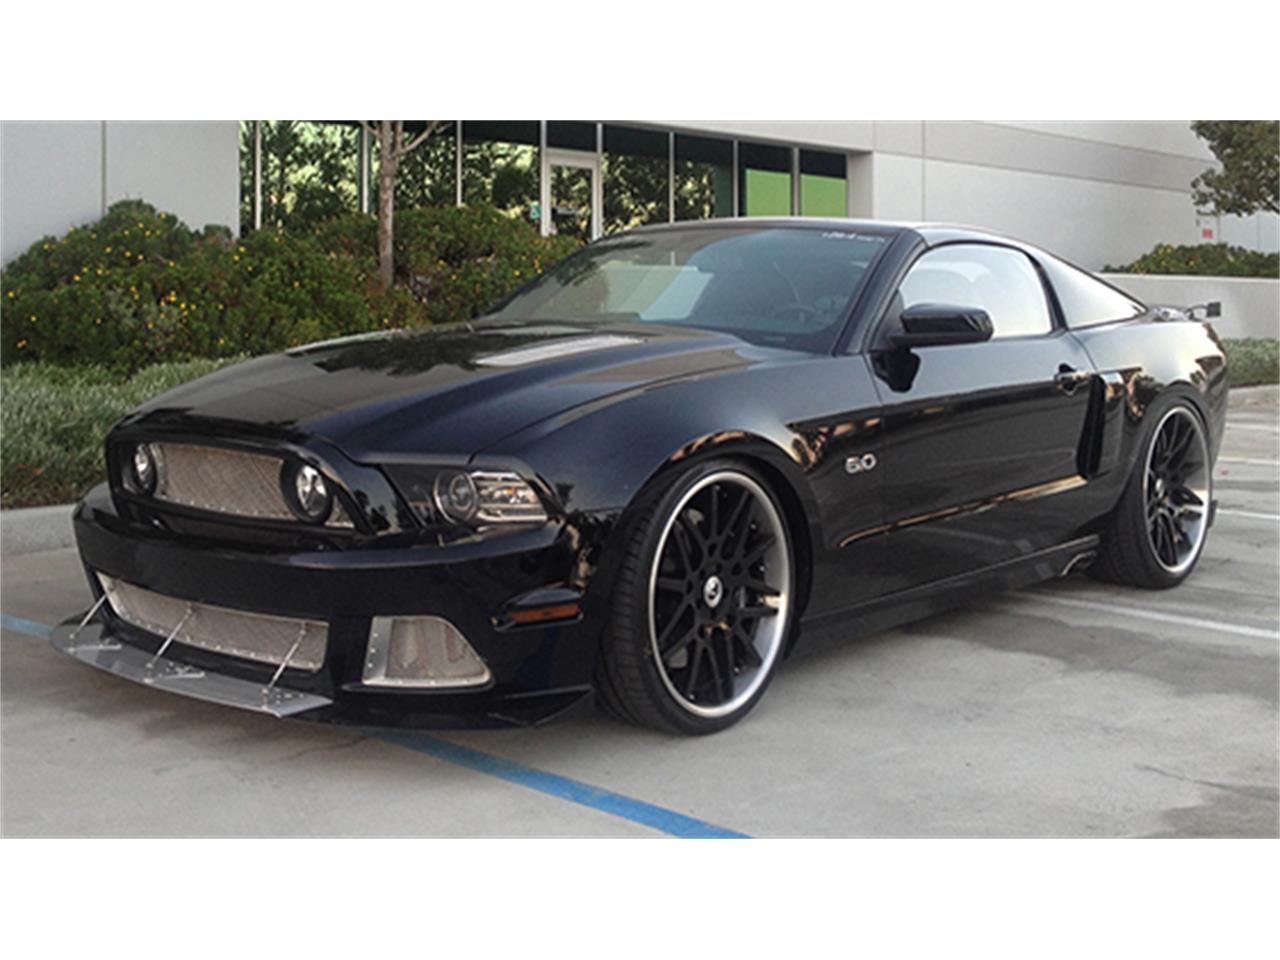 2014 Ford Mustang Gt Custom By Hollywood Hot Rods For Sale